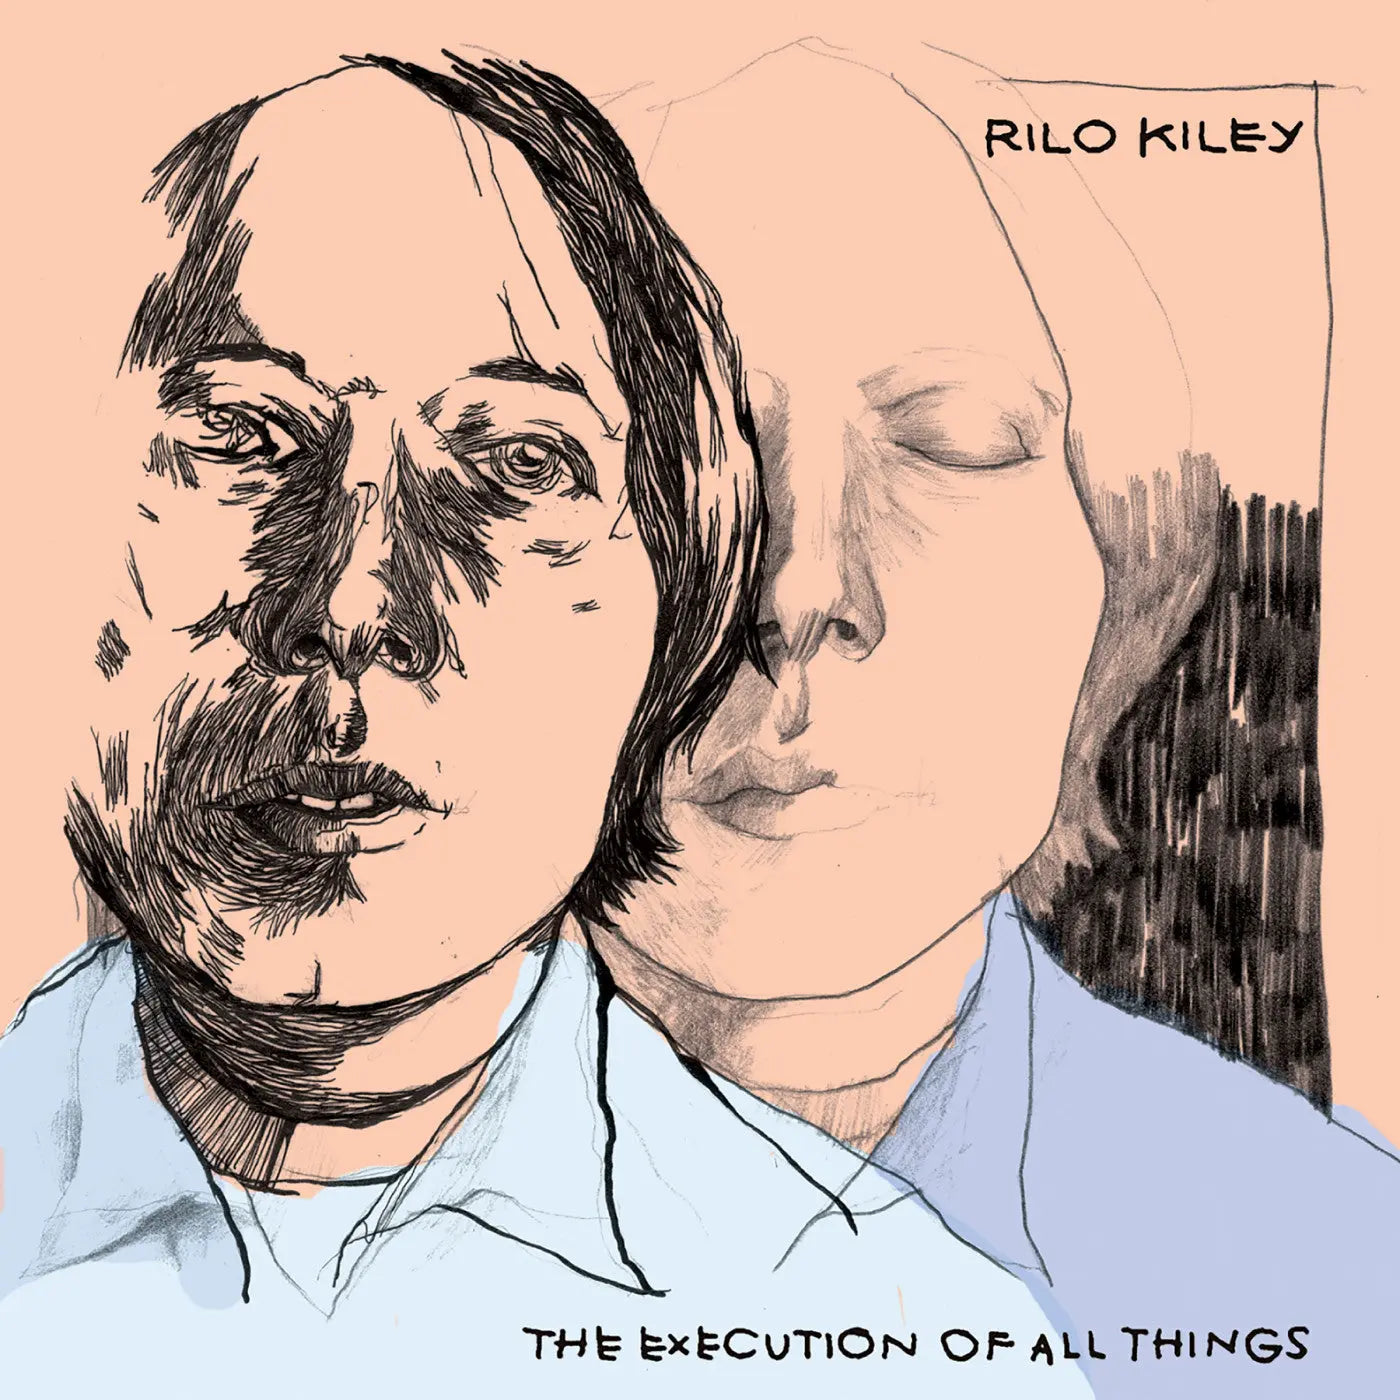 Rilo Kiley - The Execution Of All Things [Vinyl LP]